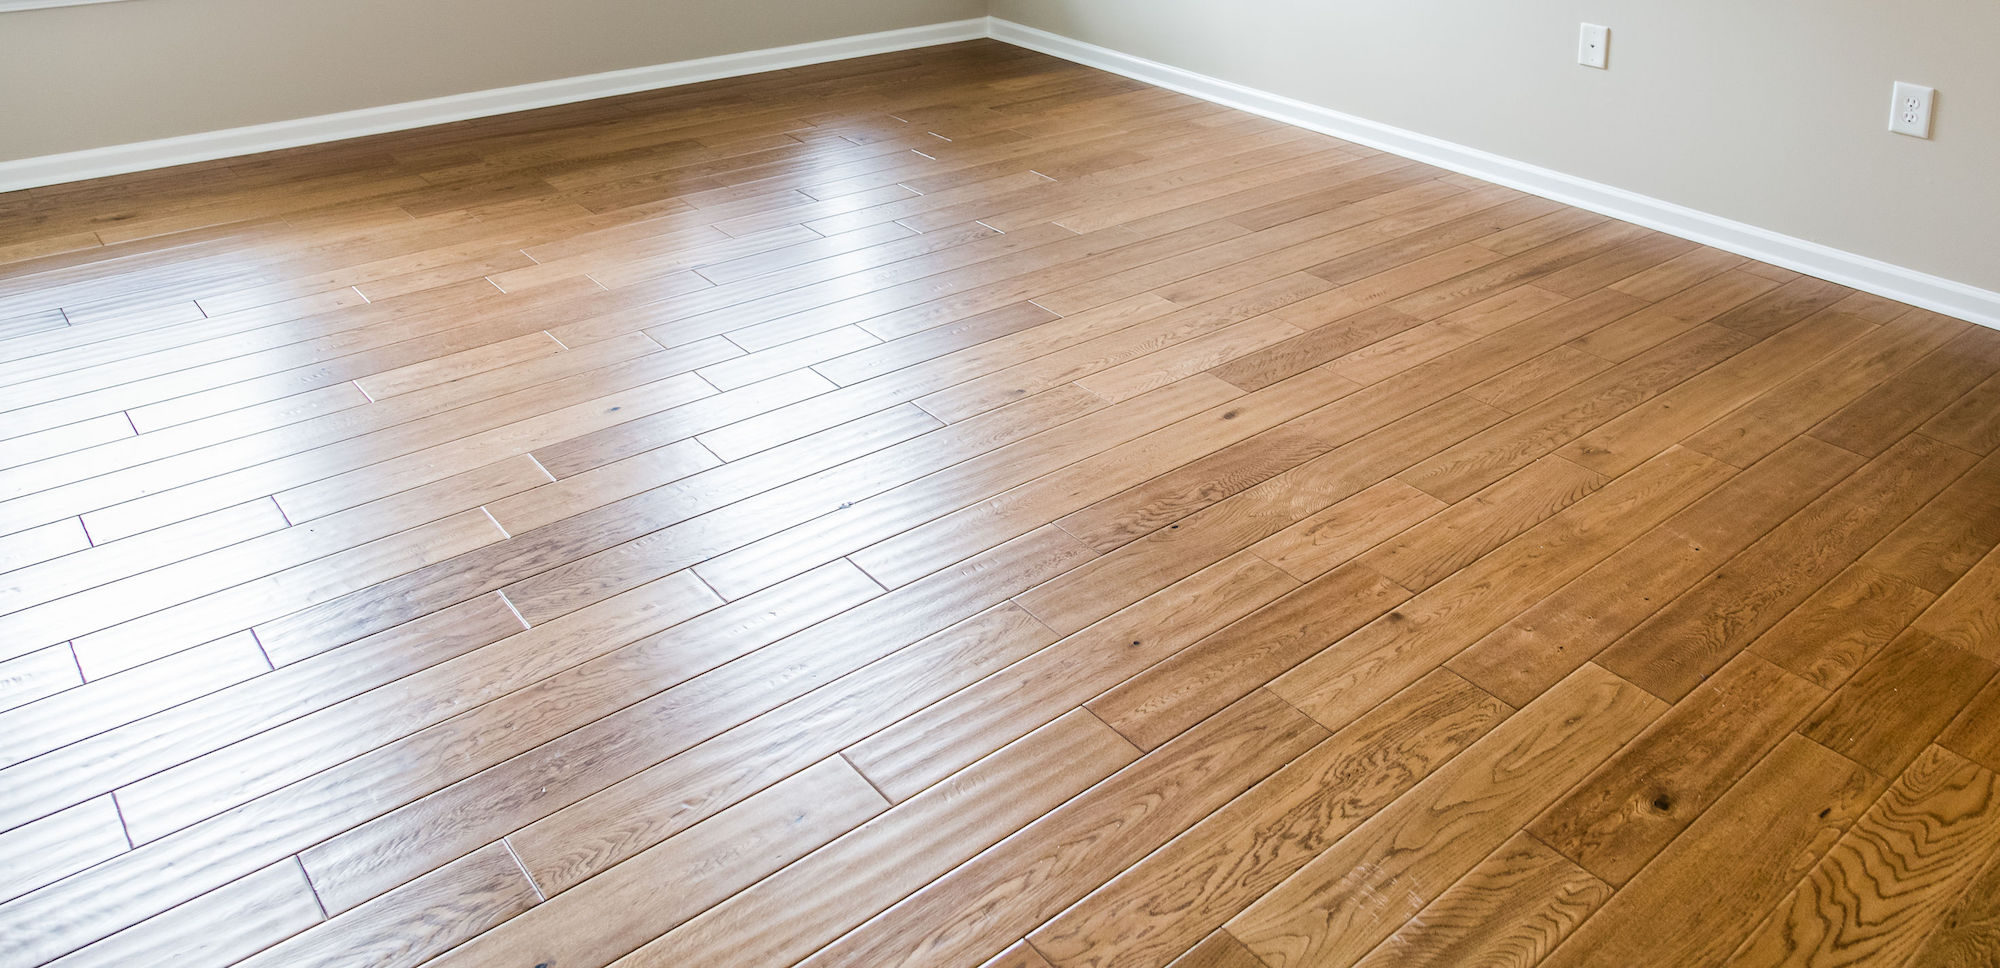 SPECIALIST IN ALL ASPECTS OF HARDWOOD & PARQUET FLOORING